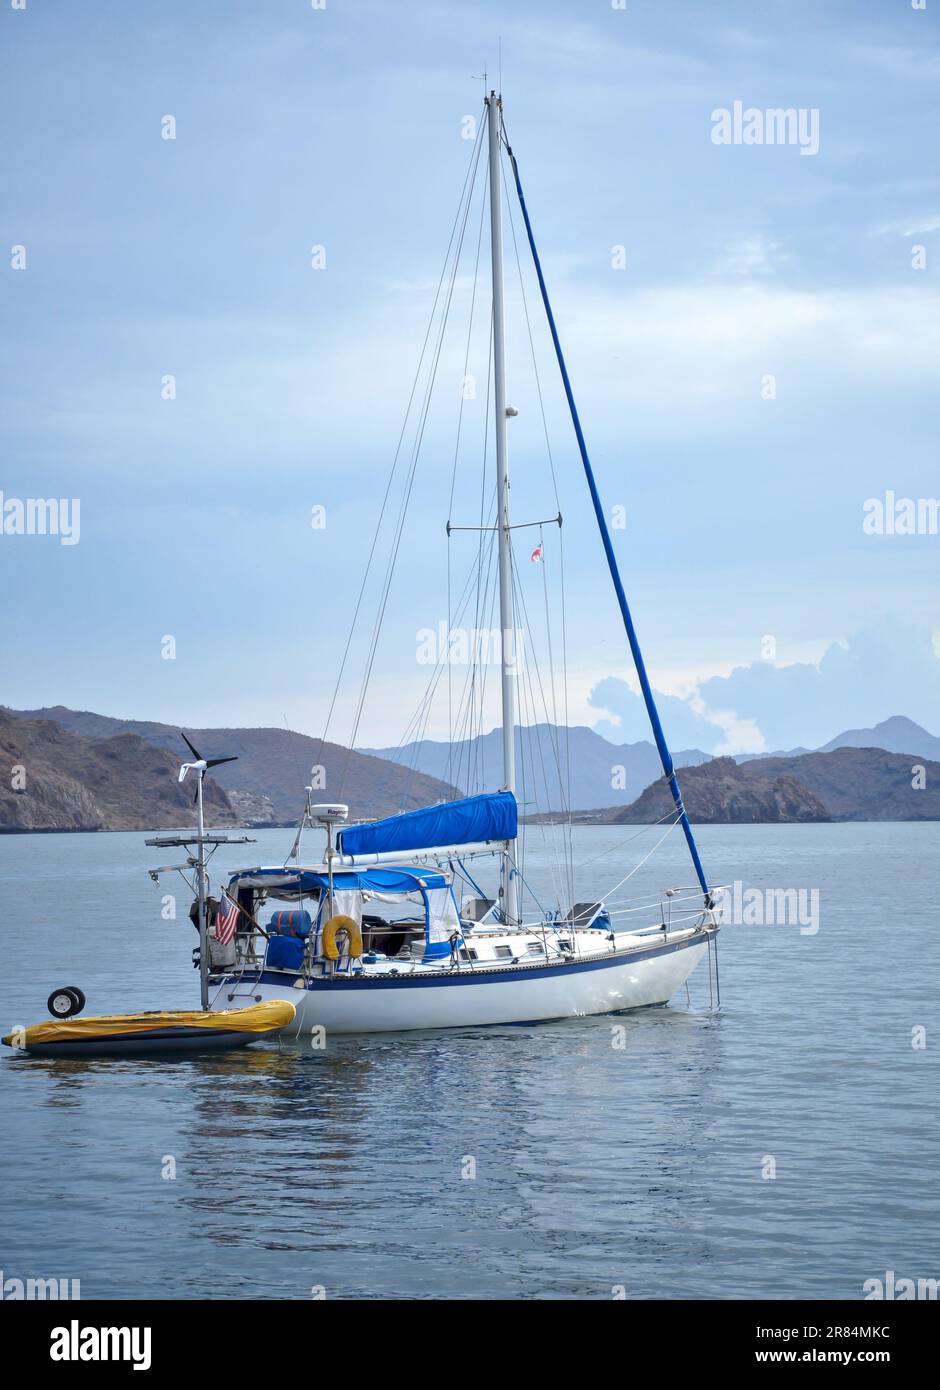 A cruising sailboat, its dinghy with tied aft, at anchor in calm seas in Bahia Concepcion, Baja Sur, Mexico, in the Sea of Cortez. Stock Photo